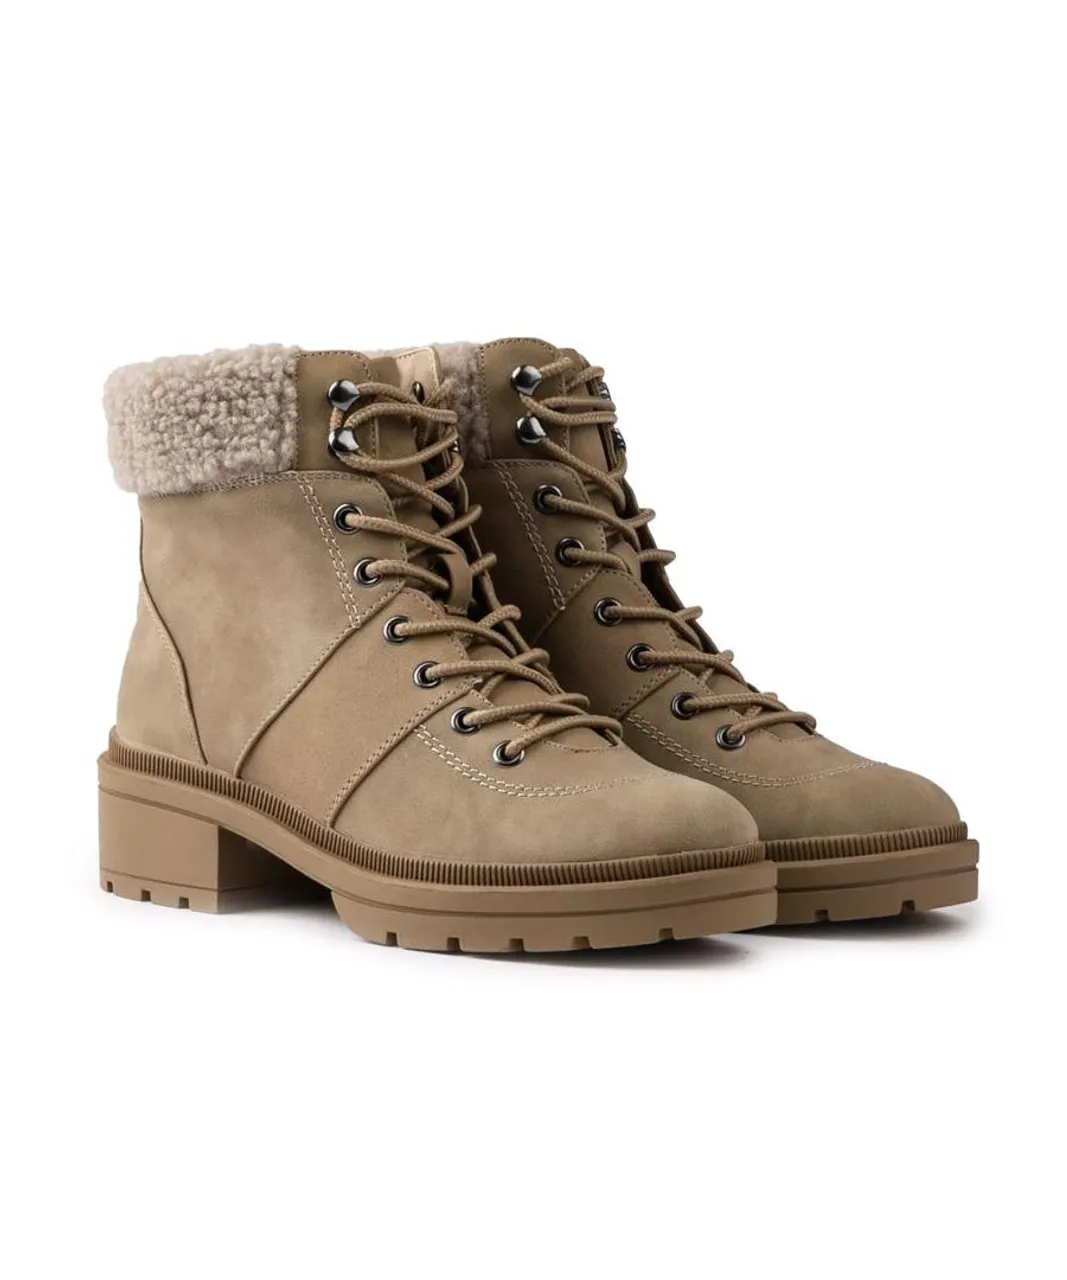 Rocket Dog Icy Ankle Boots Womens - Tan